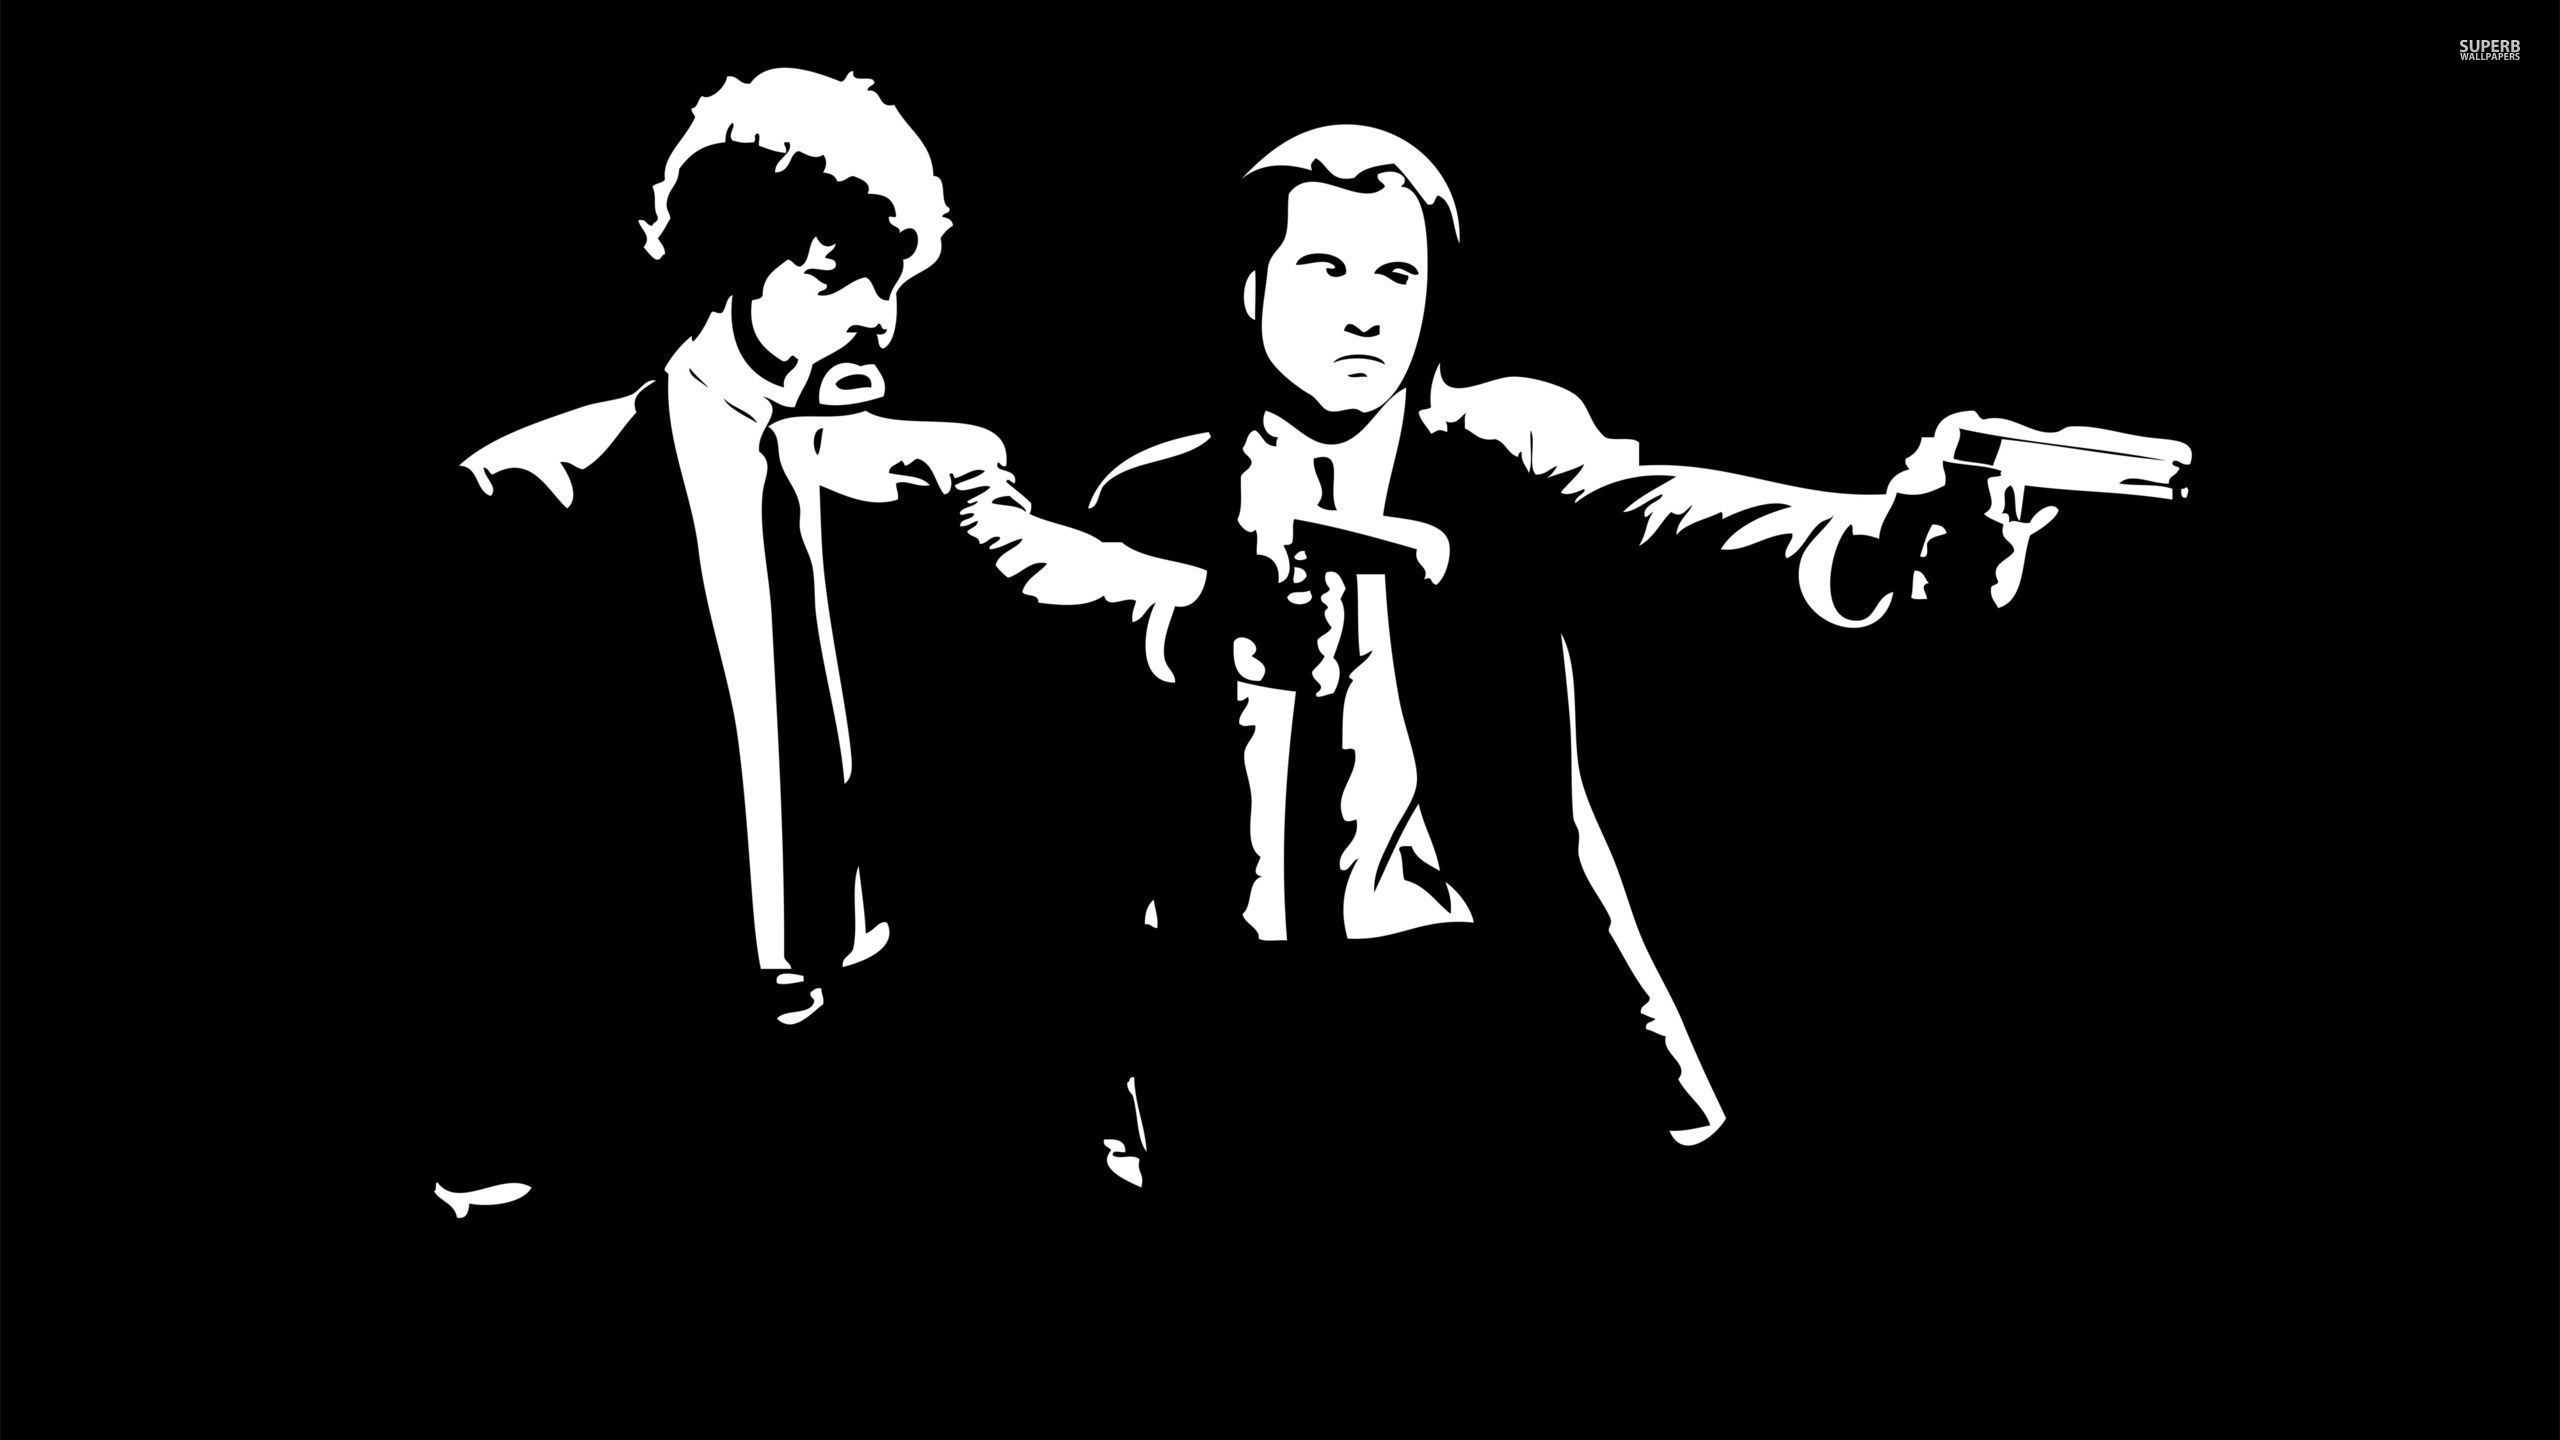 Pulp Fiction wallpaper - Movie wallpapers - #32423